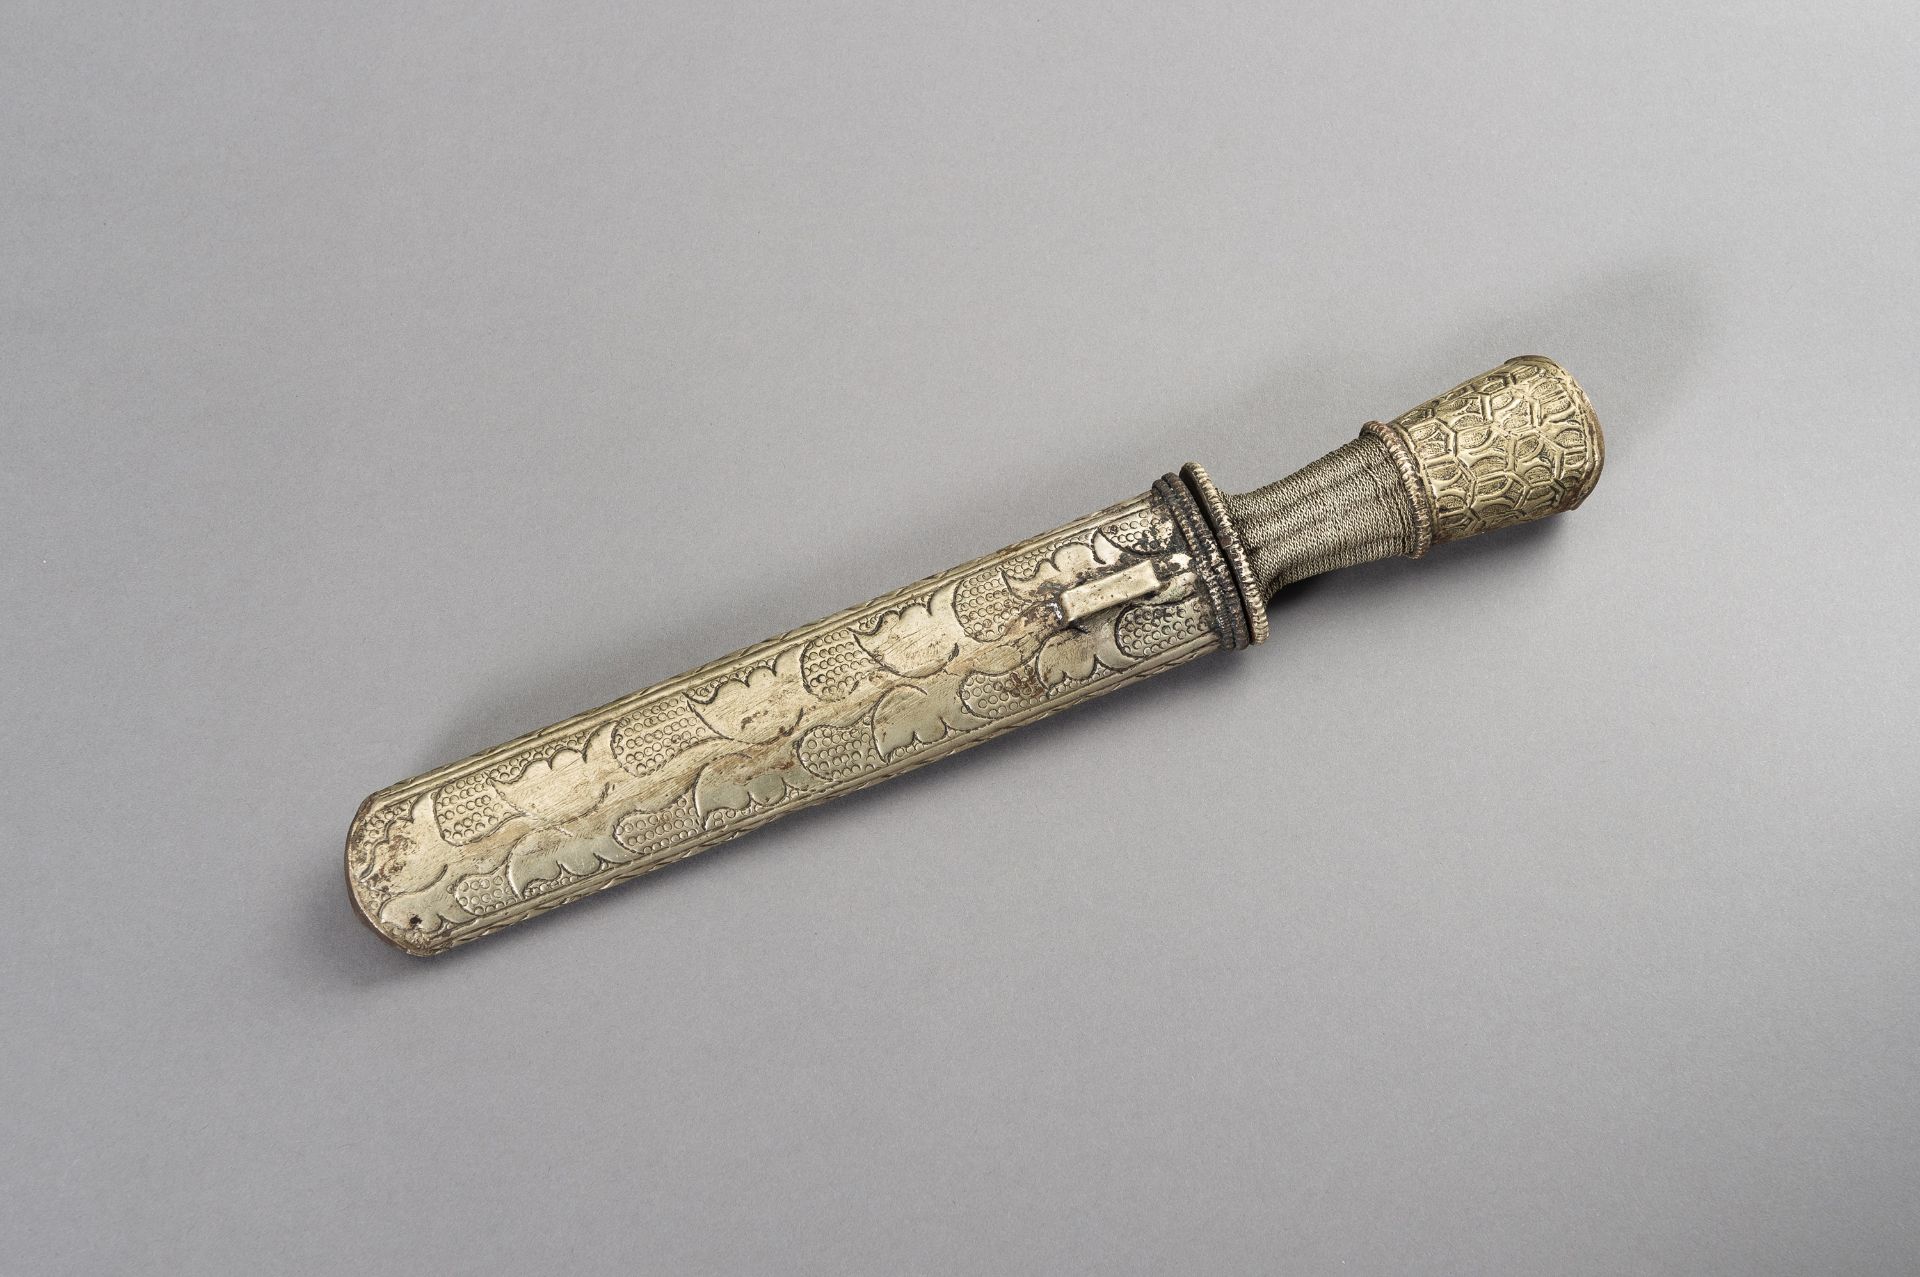 A 'BUDDHIST TREASURES' DAGGER, FIRST HALF OF THE 20TH CENTURY - Image 5 of 7